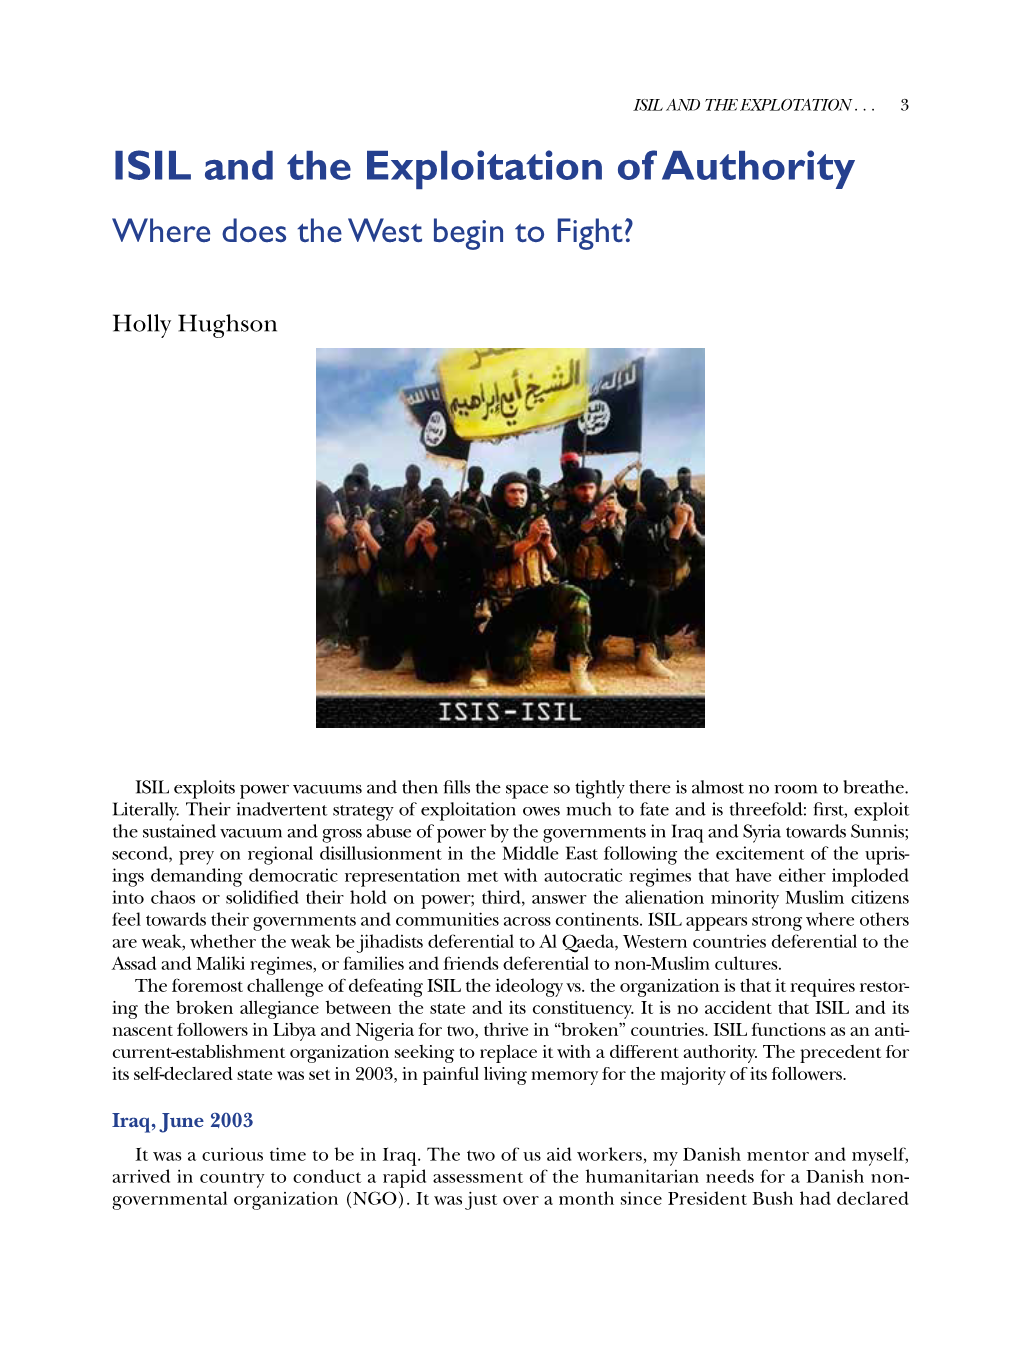 ISIL and the Exploitation of Authority Where Does the West Begin to Fight?